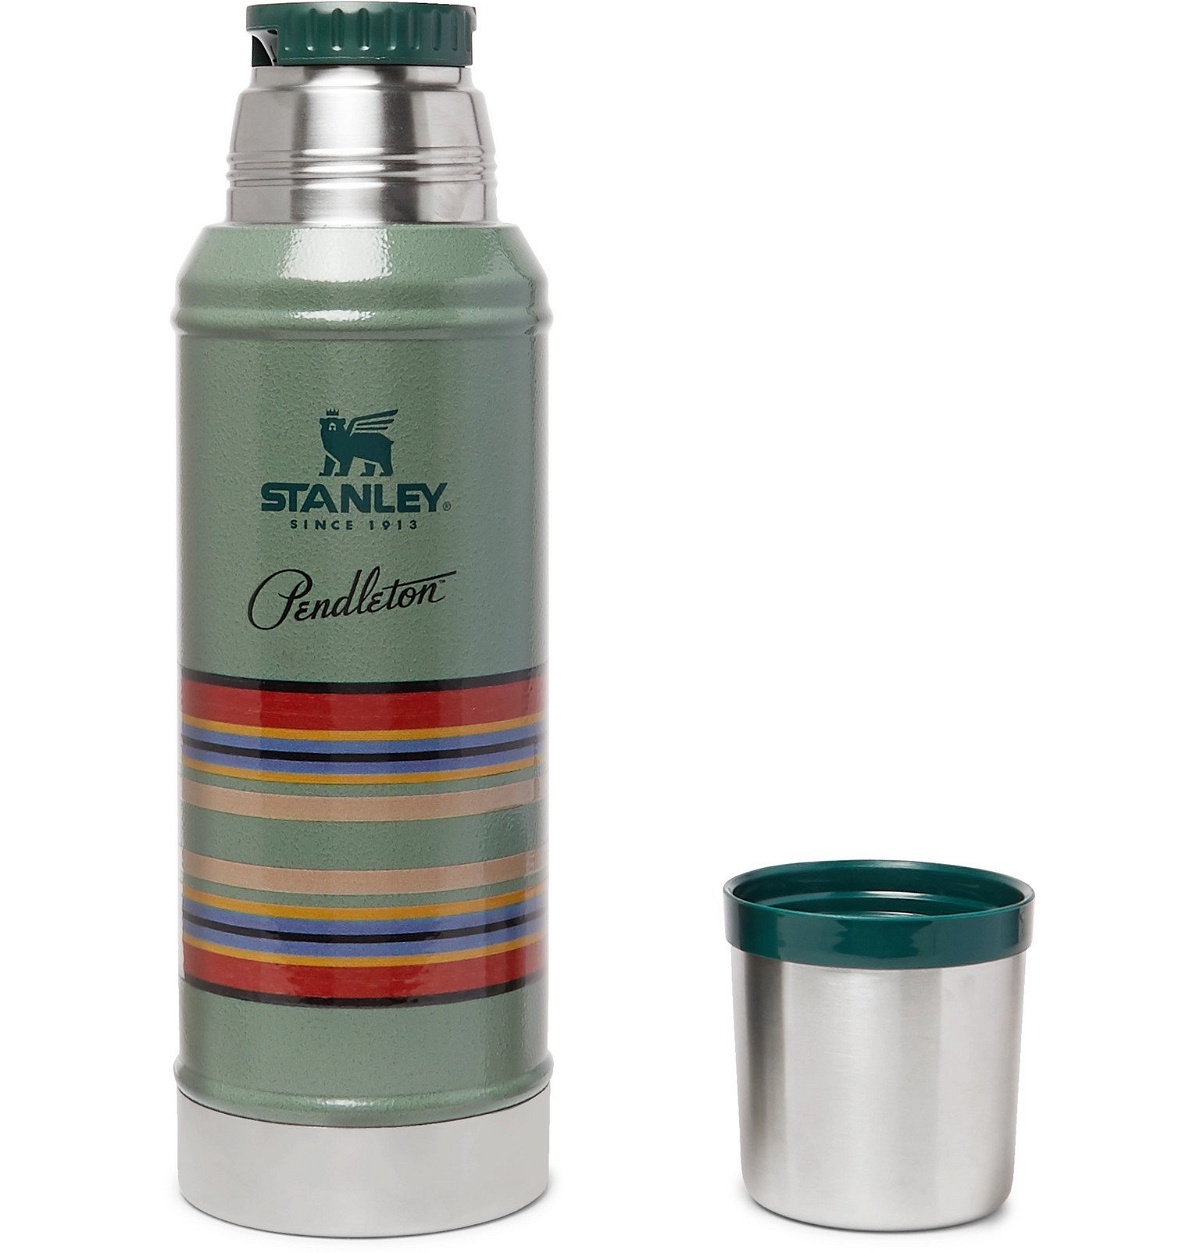 Pendleton - Stanley Printed Insulated Stainless Steel Thermos Flask - Green  Pendleton